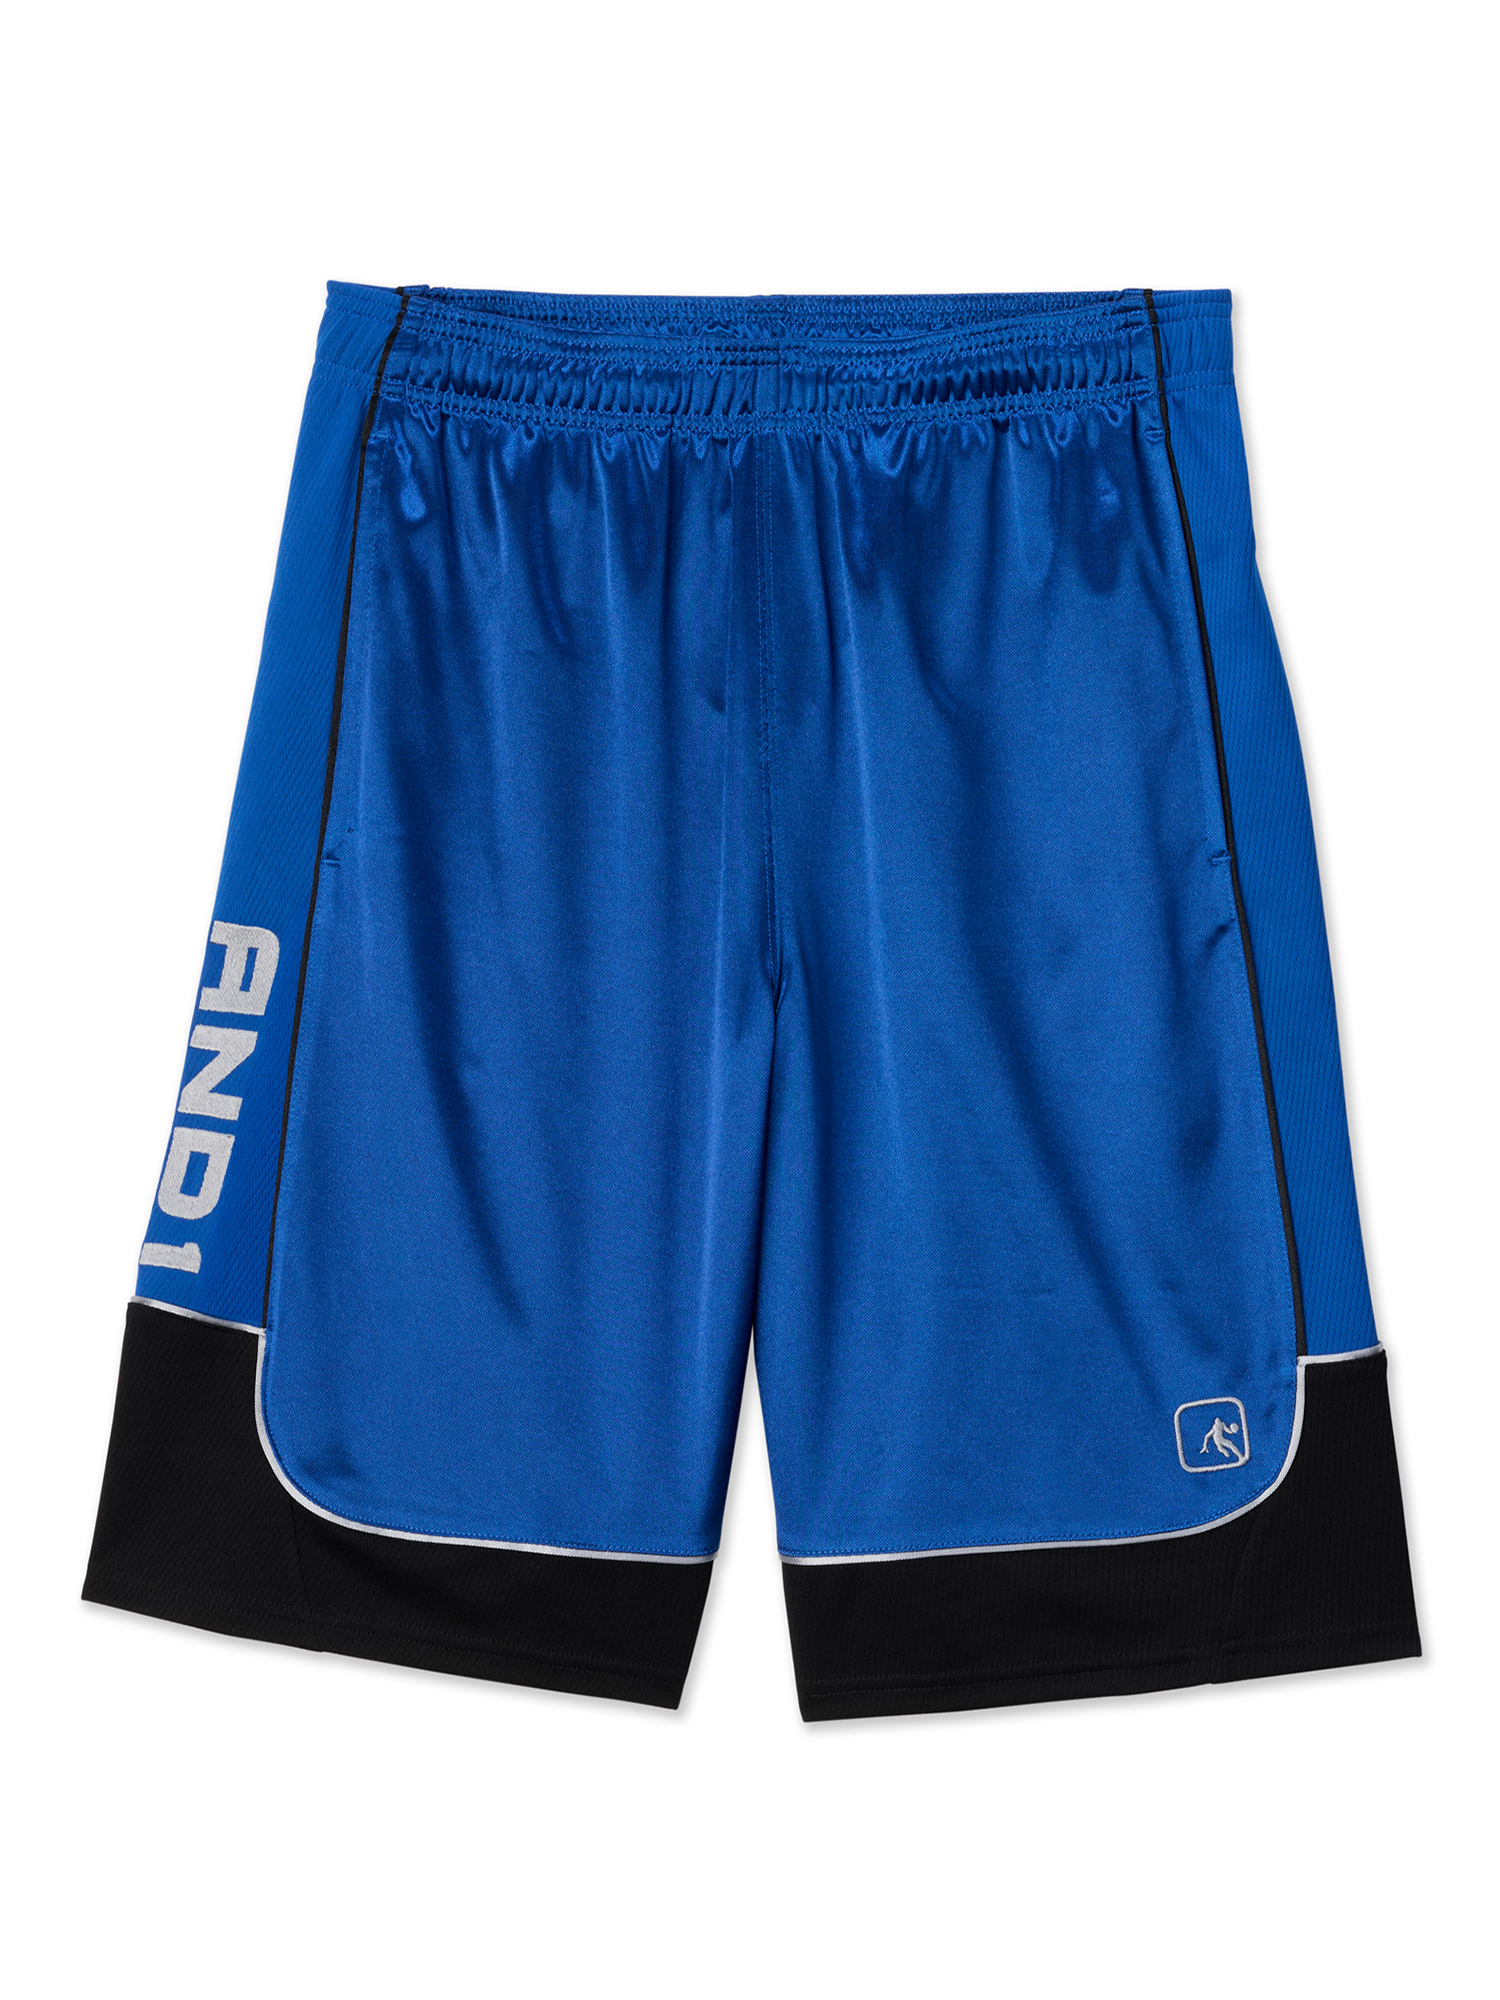 AND1 Men and Big Men's All Court Colorblock 11" Shorts, up to Size 3XL - image 5 of 5